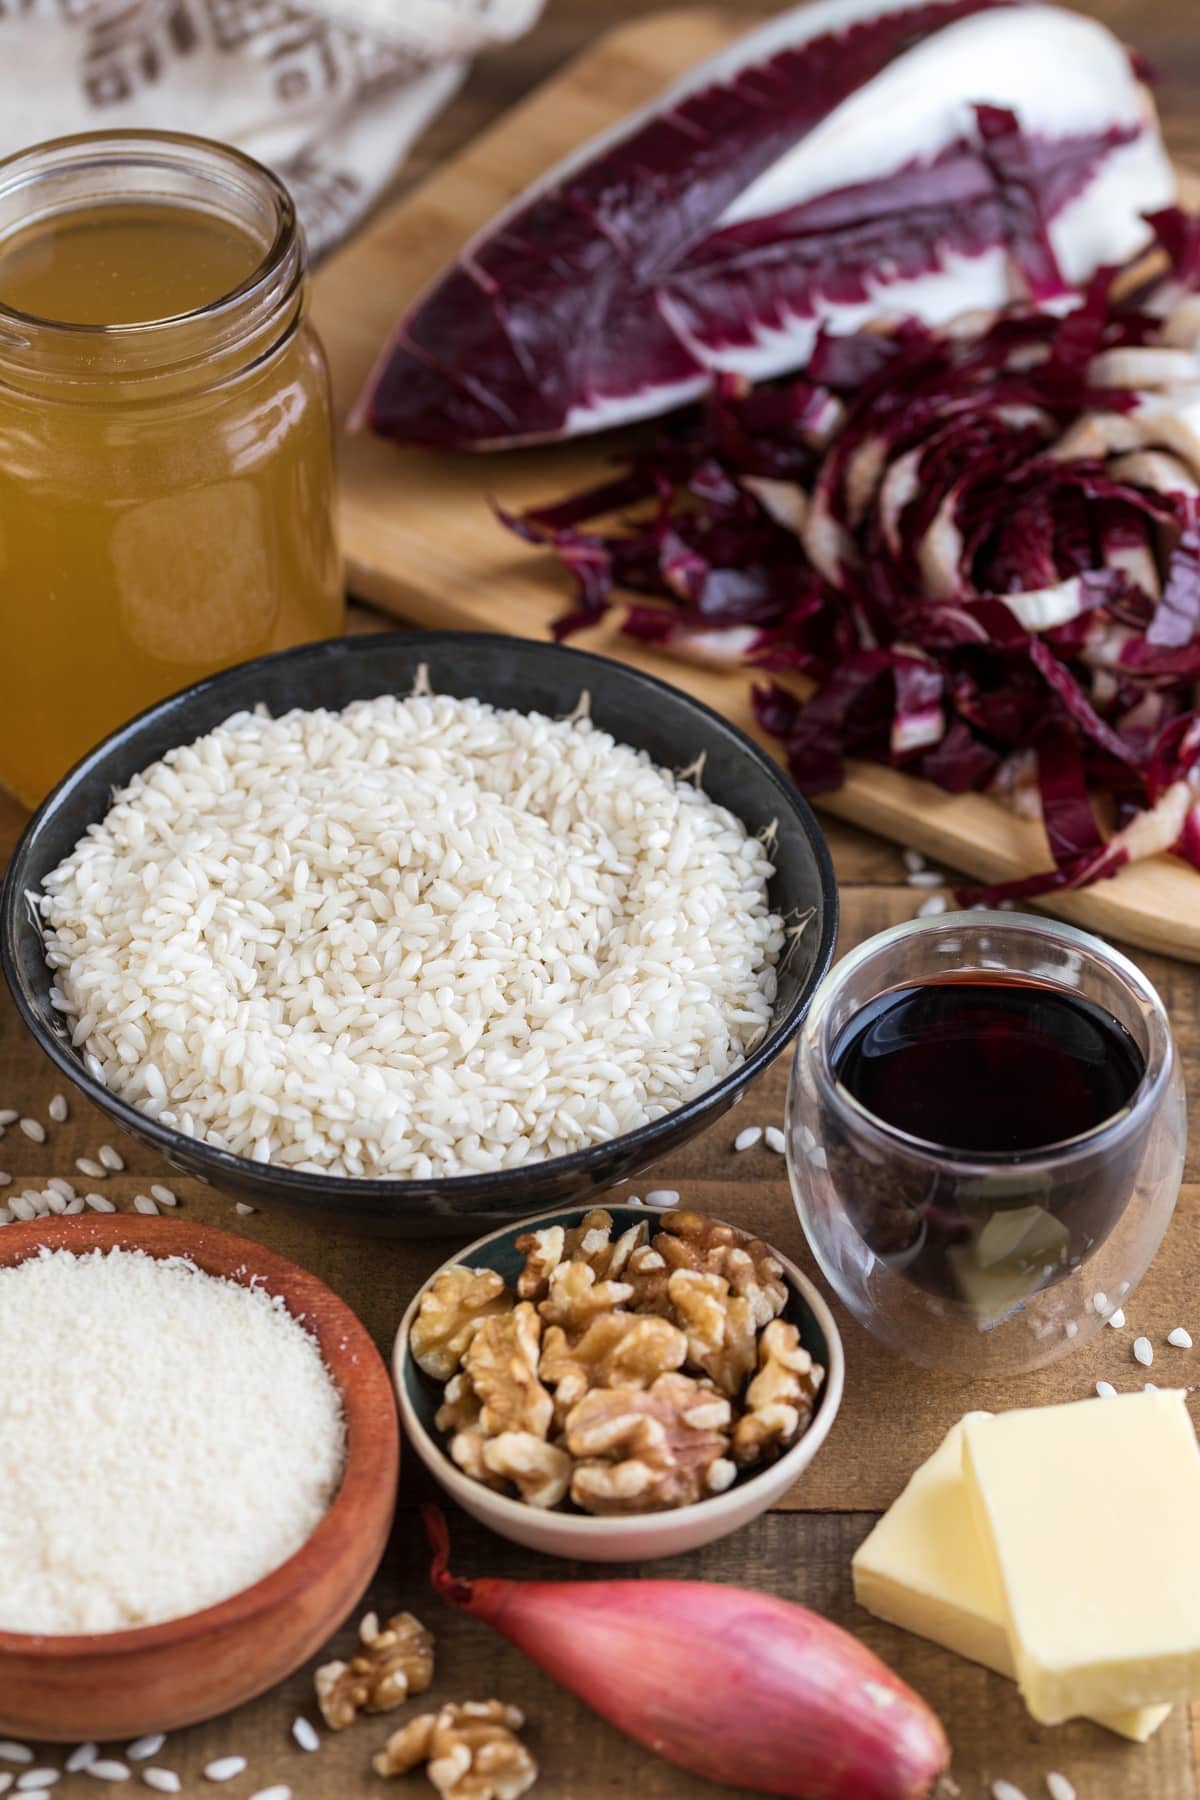 Ingredients needed to make radicchio risotto placed on a wooden table.